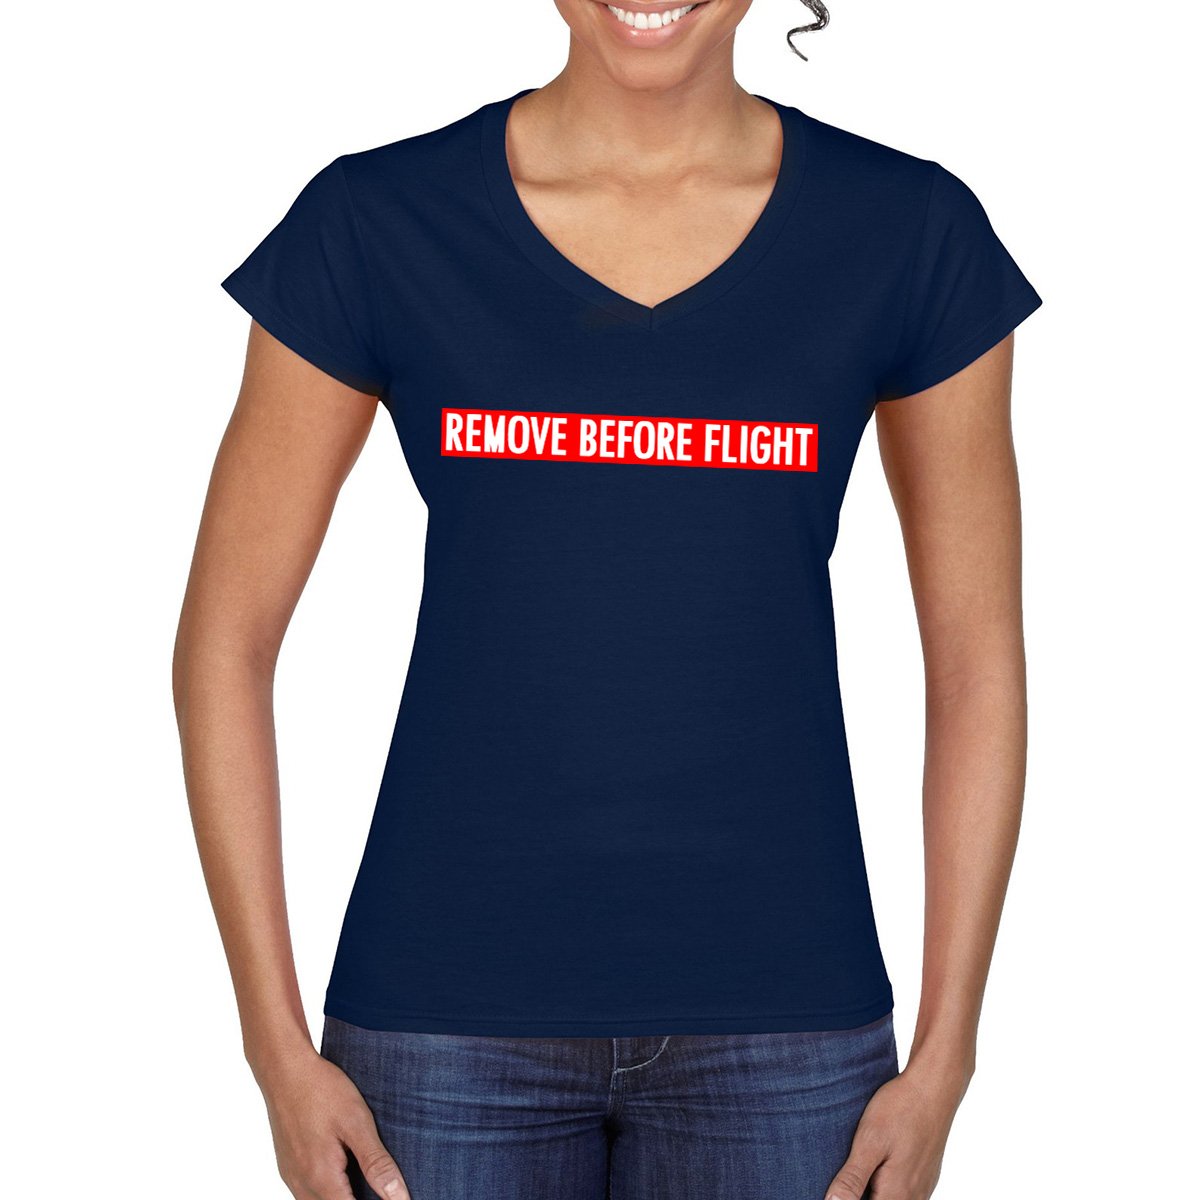 REMOVE BEFORE FLIGHT Women's Semi-Fitted T-Shirt